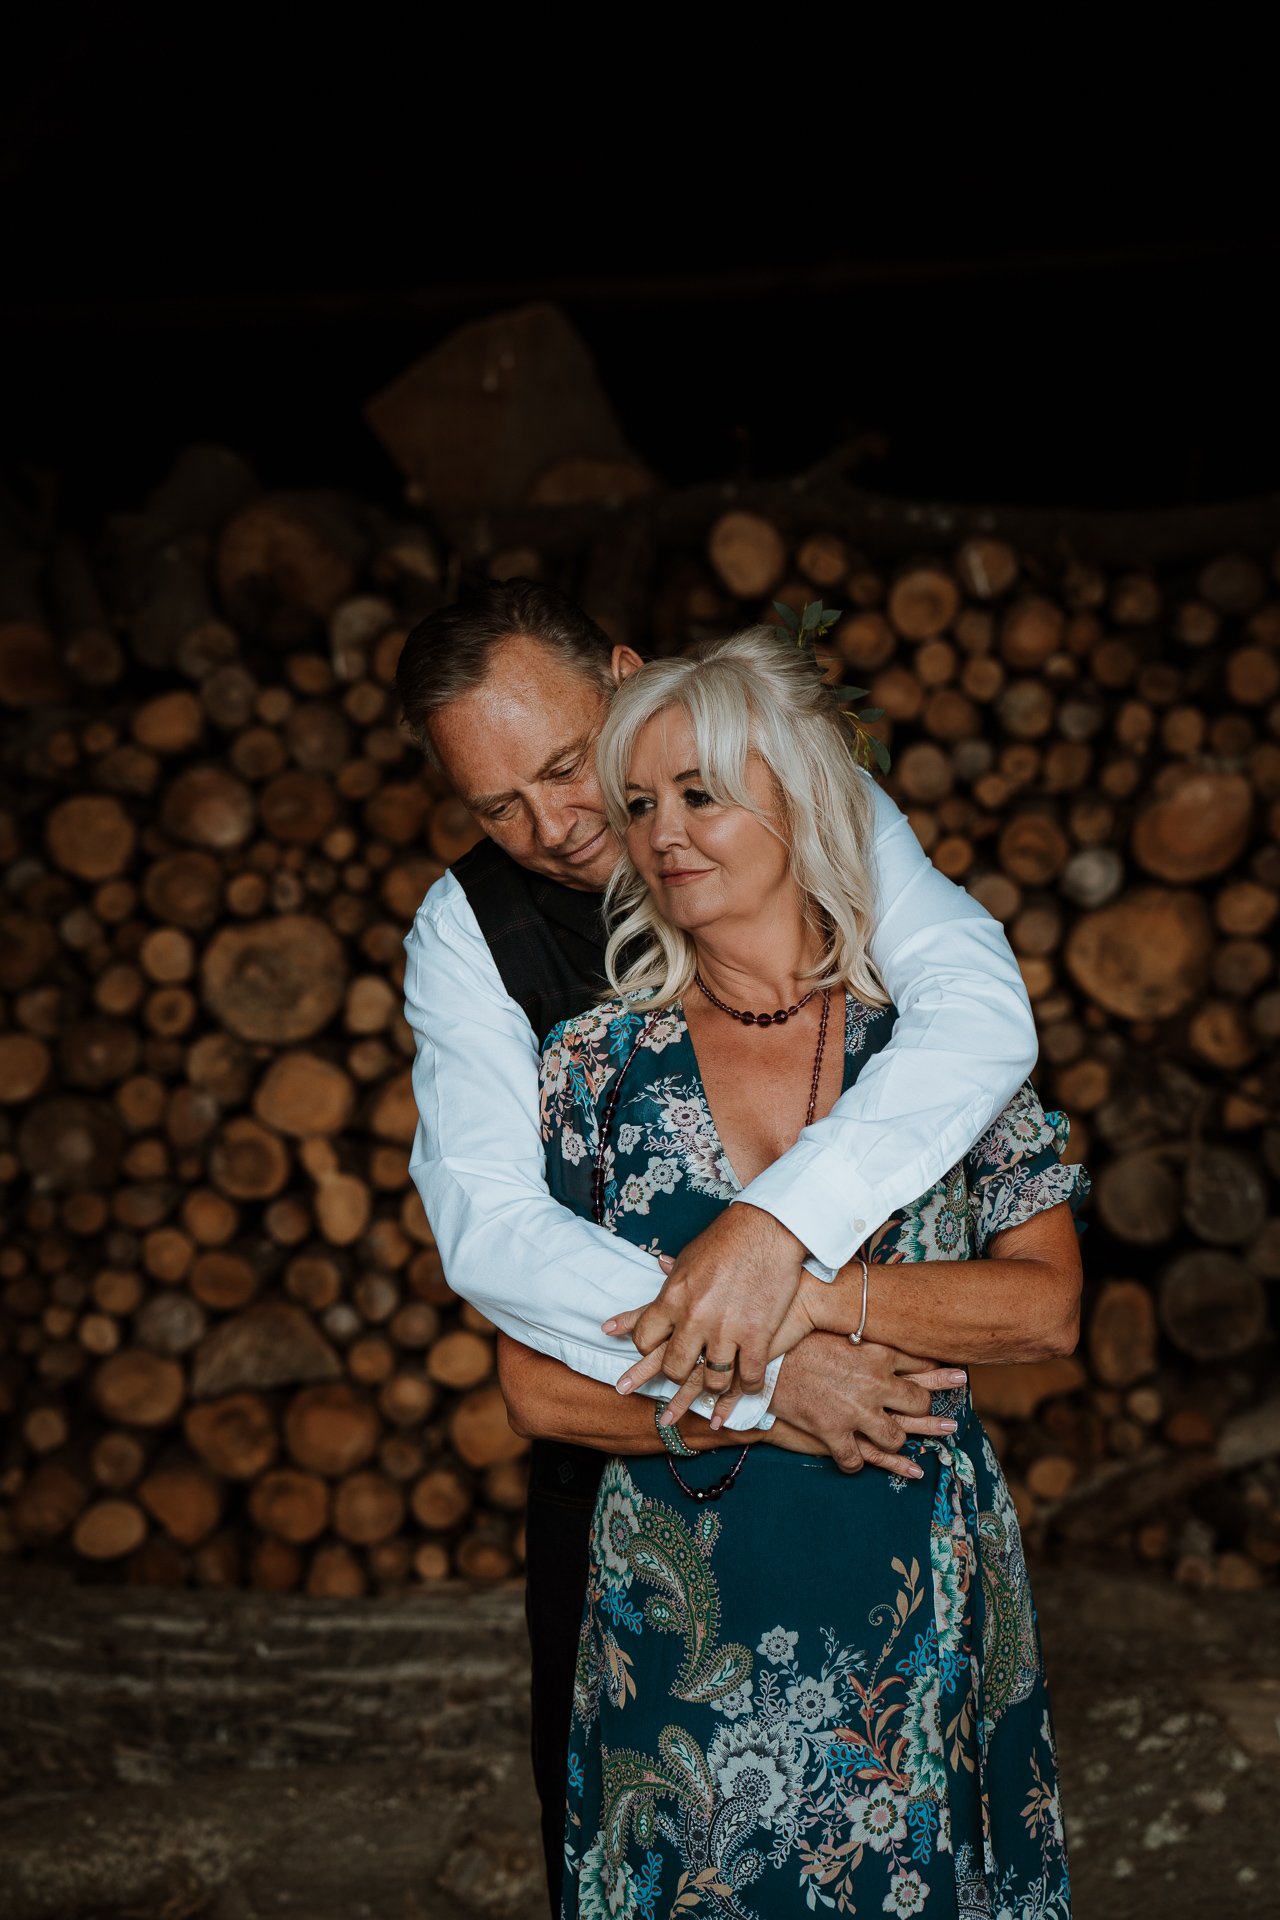 Groom with his arms wrapped around his bride in front of wood stack in the barn at The Oak barn